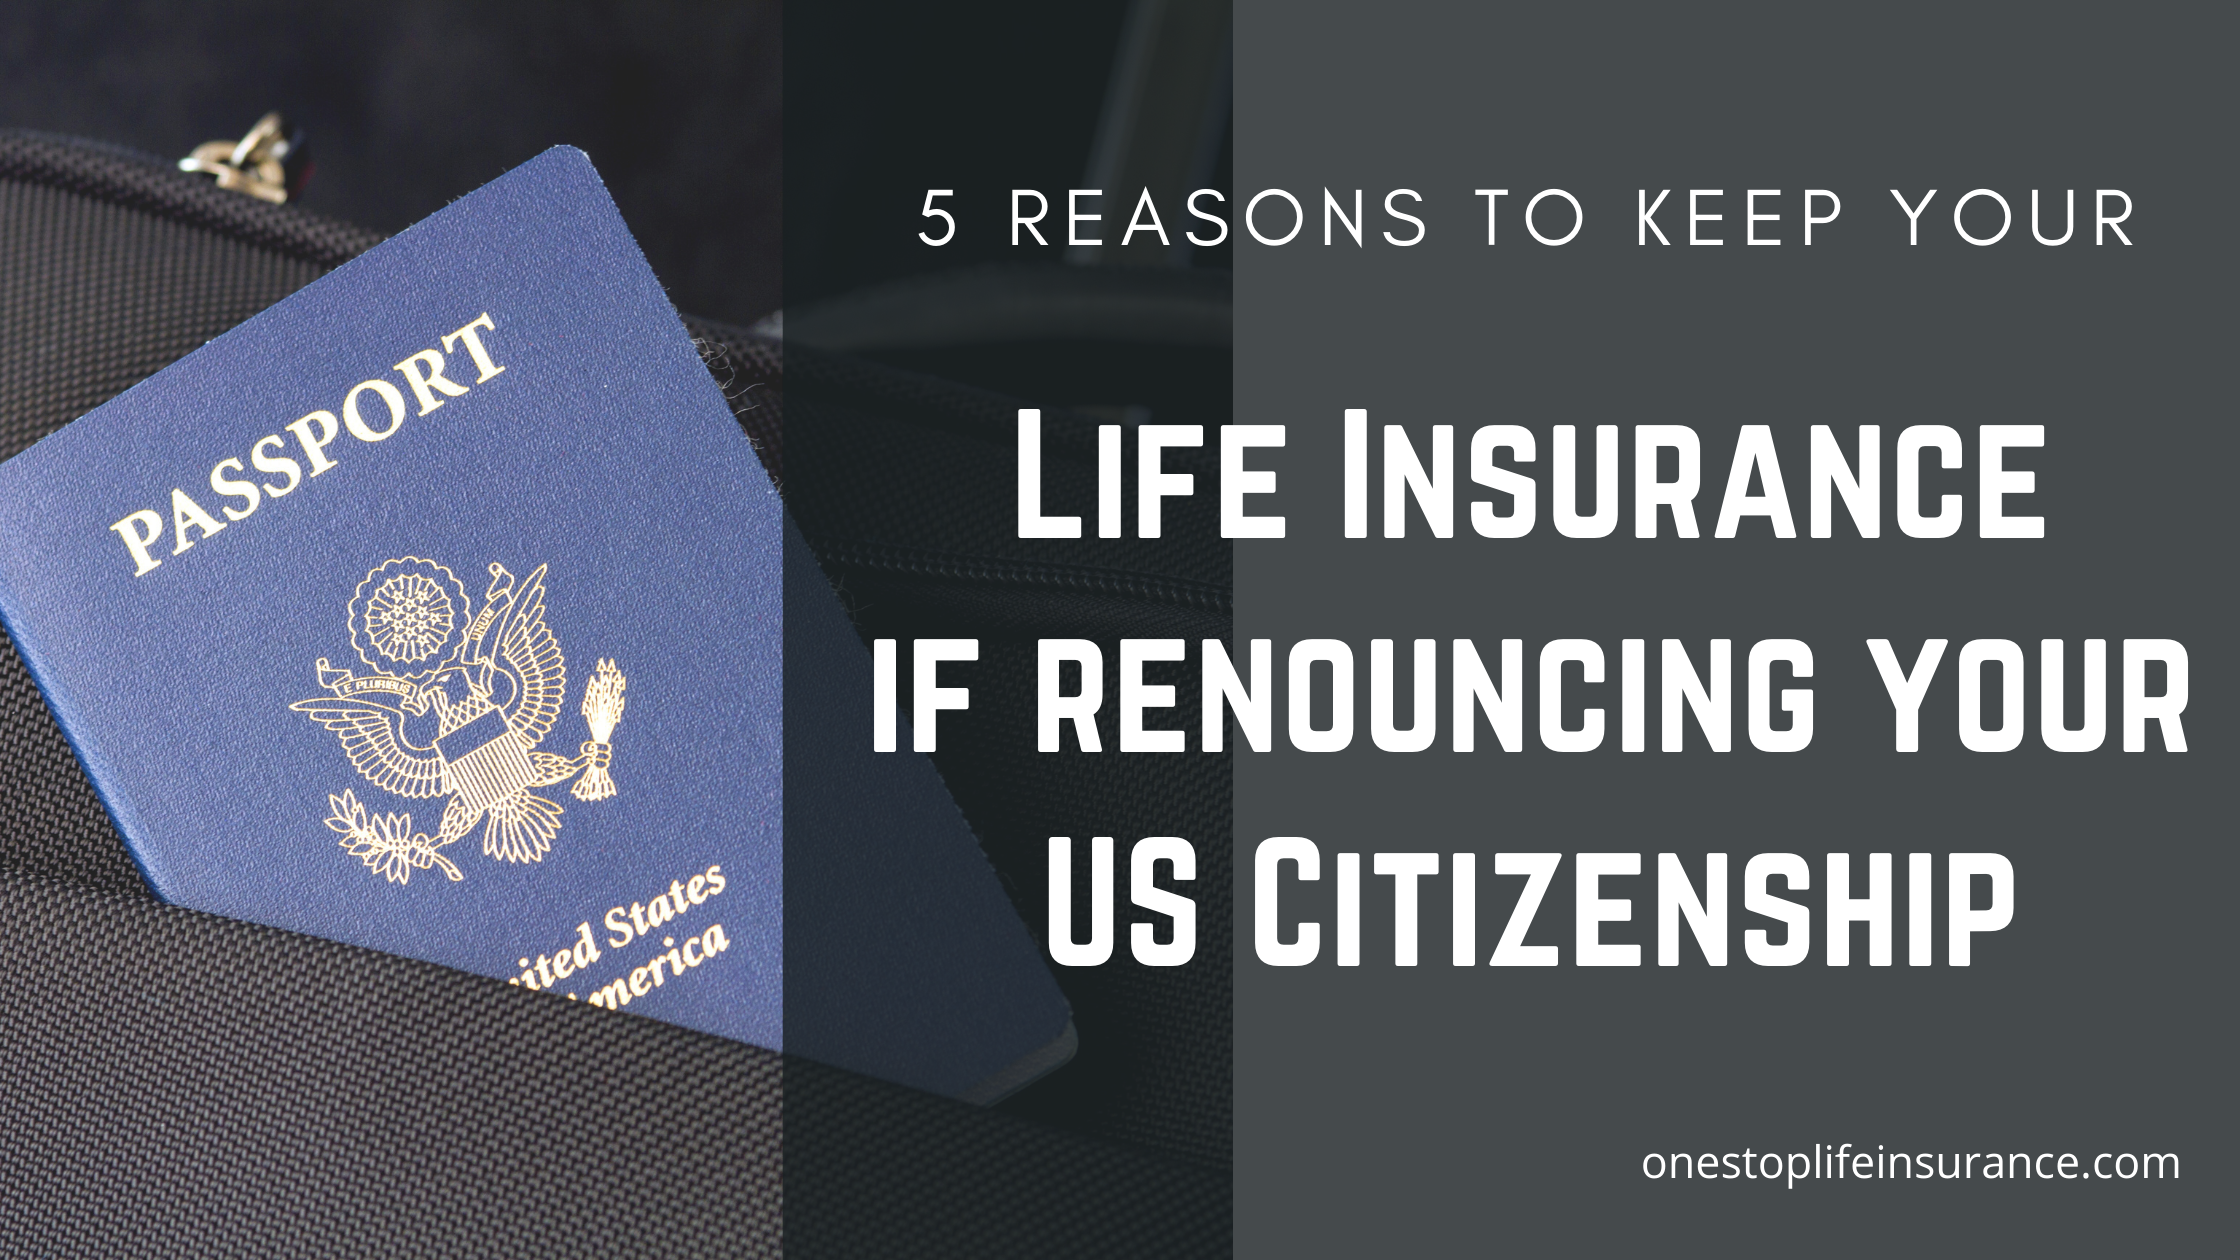 5 reasons to keep your life insurance if renouncing your US cizizenship